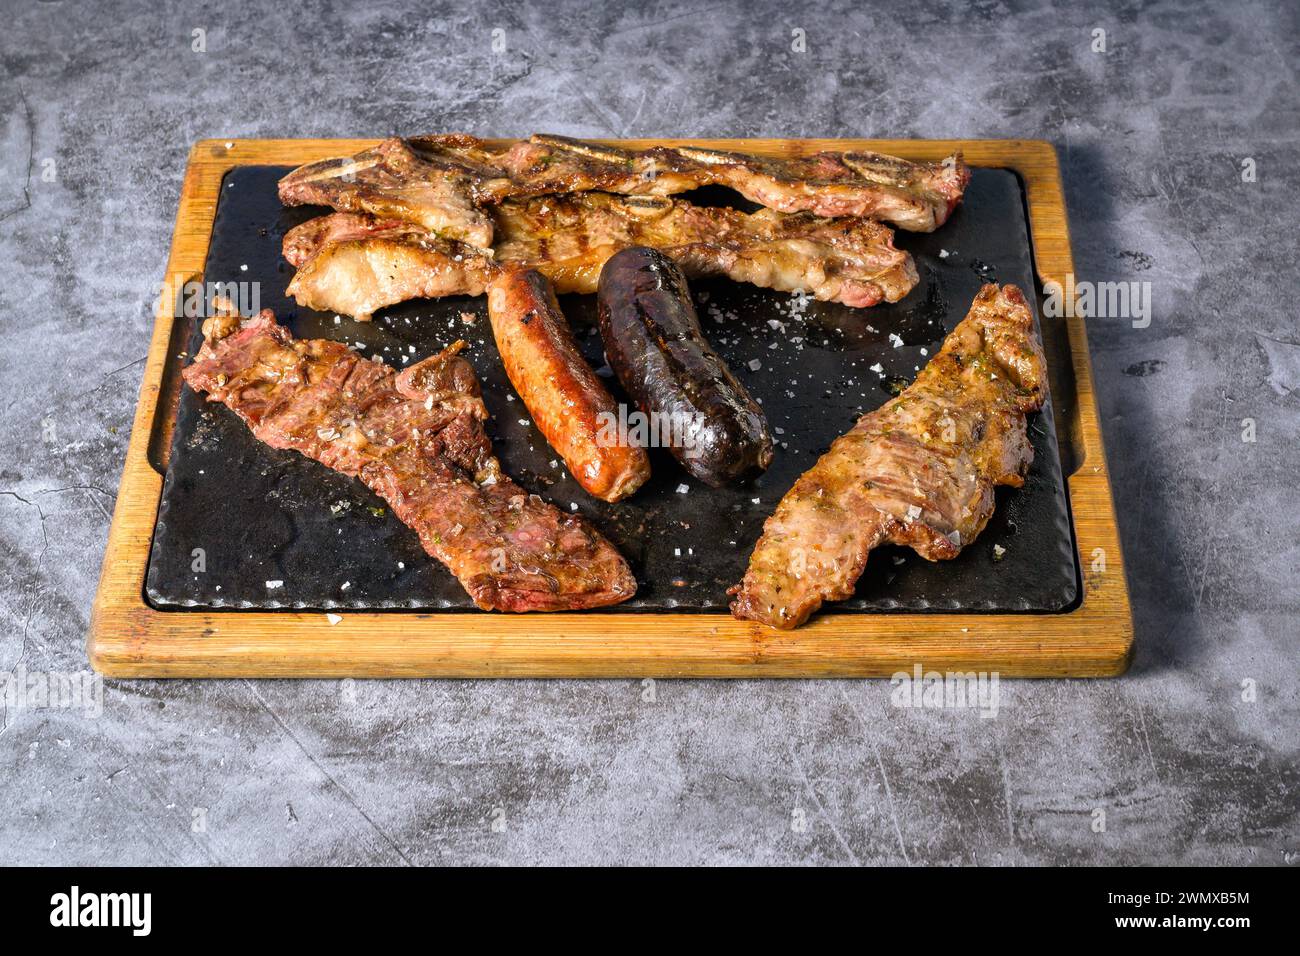 Mixed argentine beef barbecue rico Stock Photo